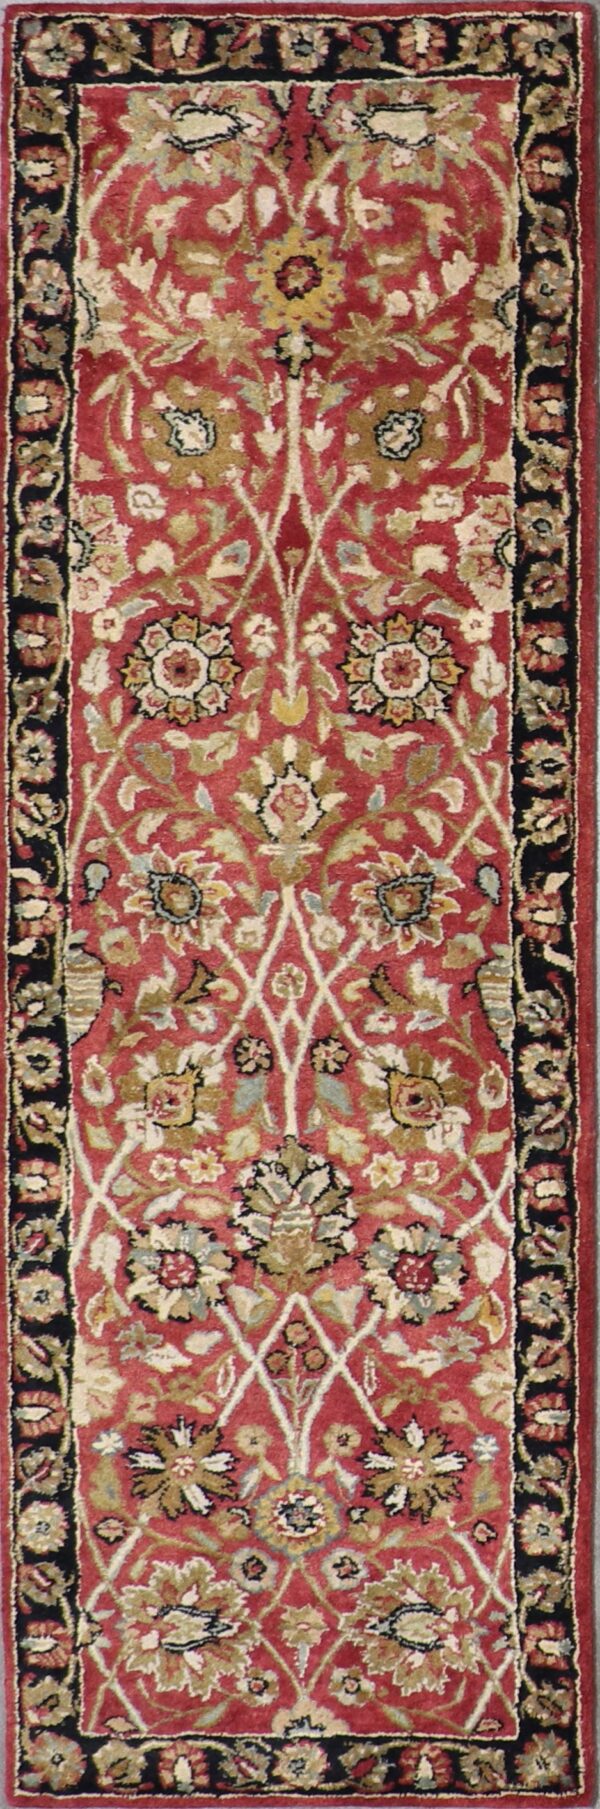 2'5"x8' Decorative Wool Hand-Tufted Rug - Direct Rug Import | Rugs in Chicago, Indiana,South Bend,Granger